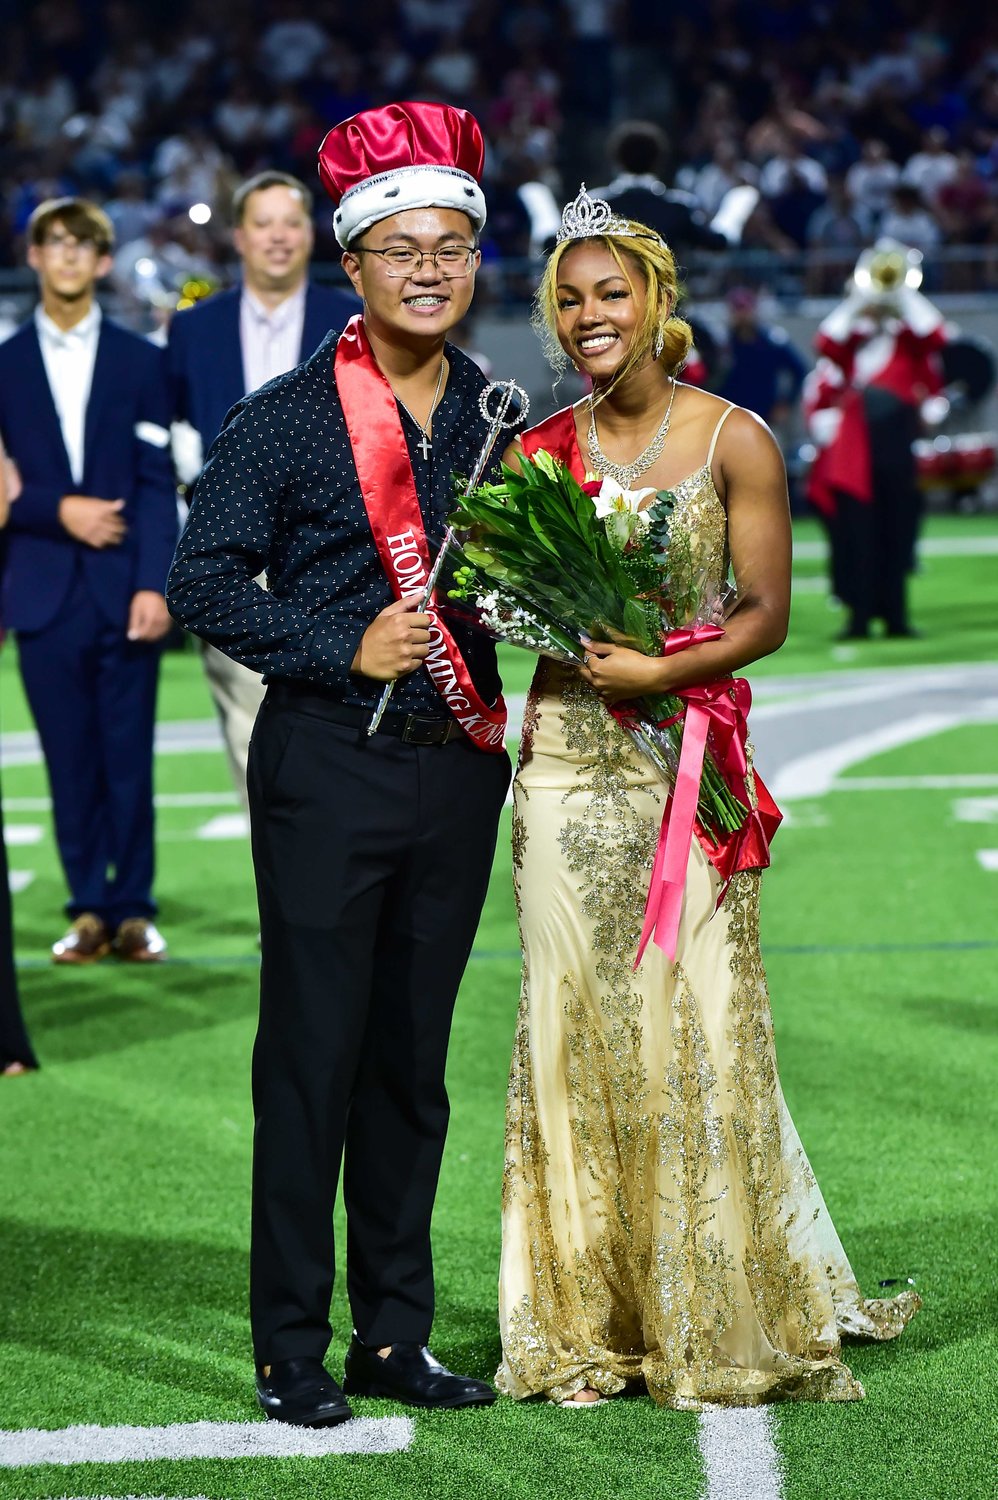 Katy, Tx. Oct. 1, 2021: Katy's homecoming queen and king elect Courtney Welch and Ethan Tran (Photo by Mark Goodman / Katy Times)